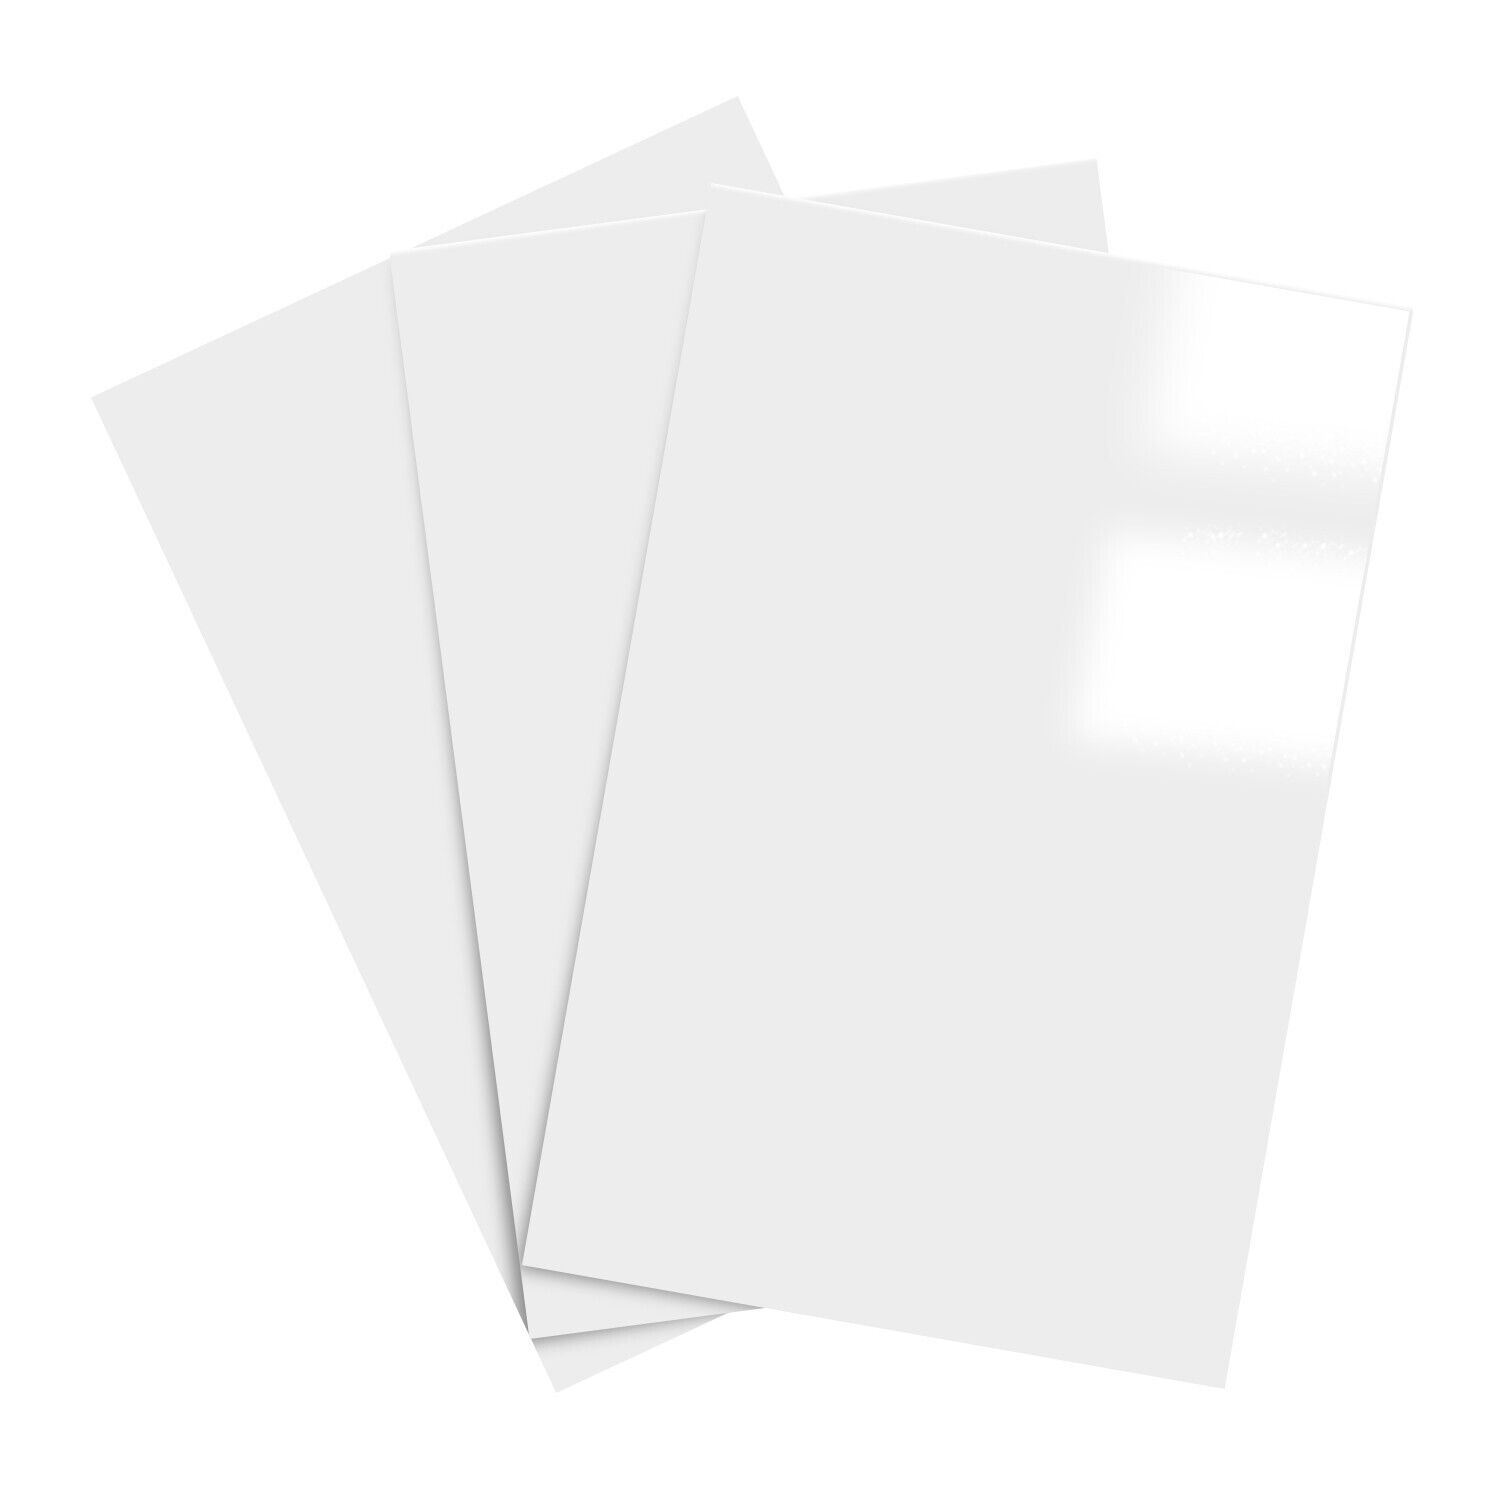 Double-sided Gloss Digital Cardstock Paper C2s, 11 X 17, 100lb Cover, 50 Sheets